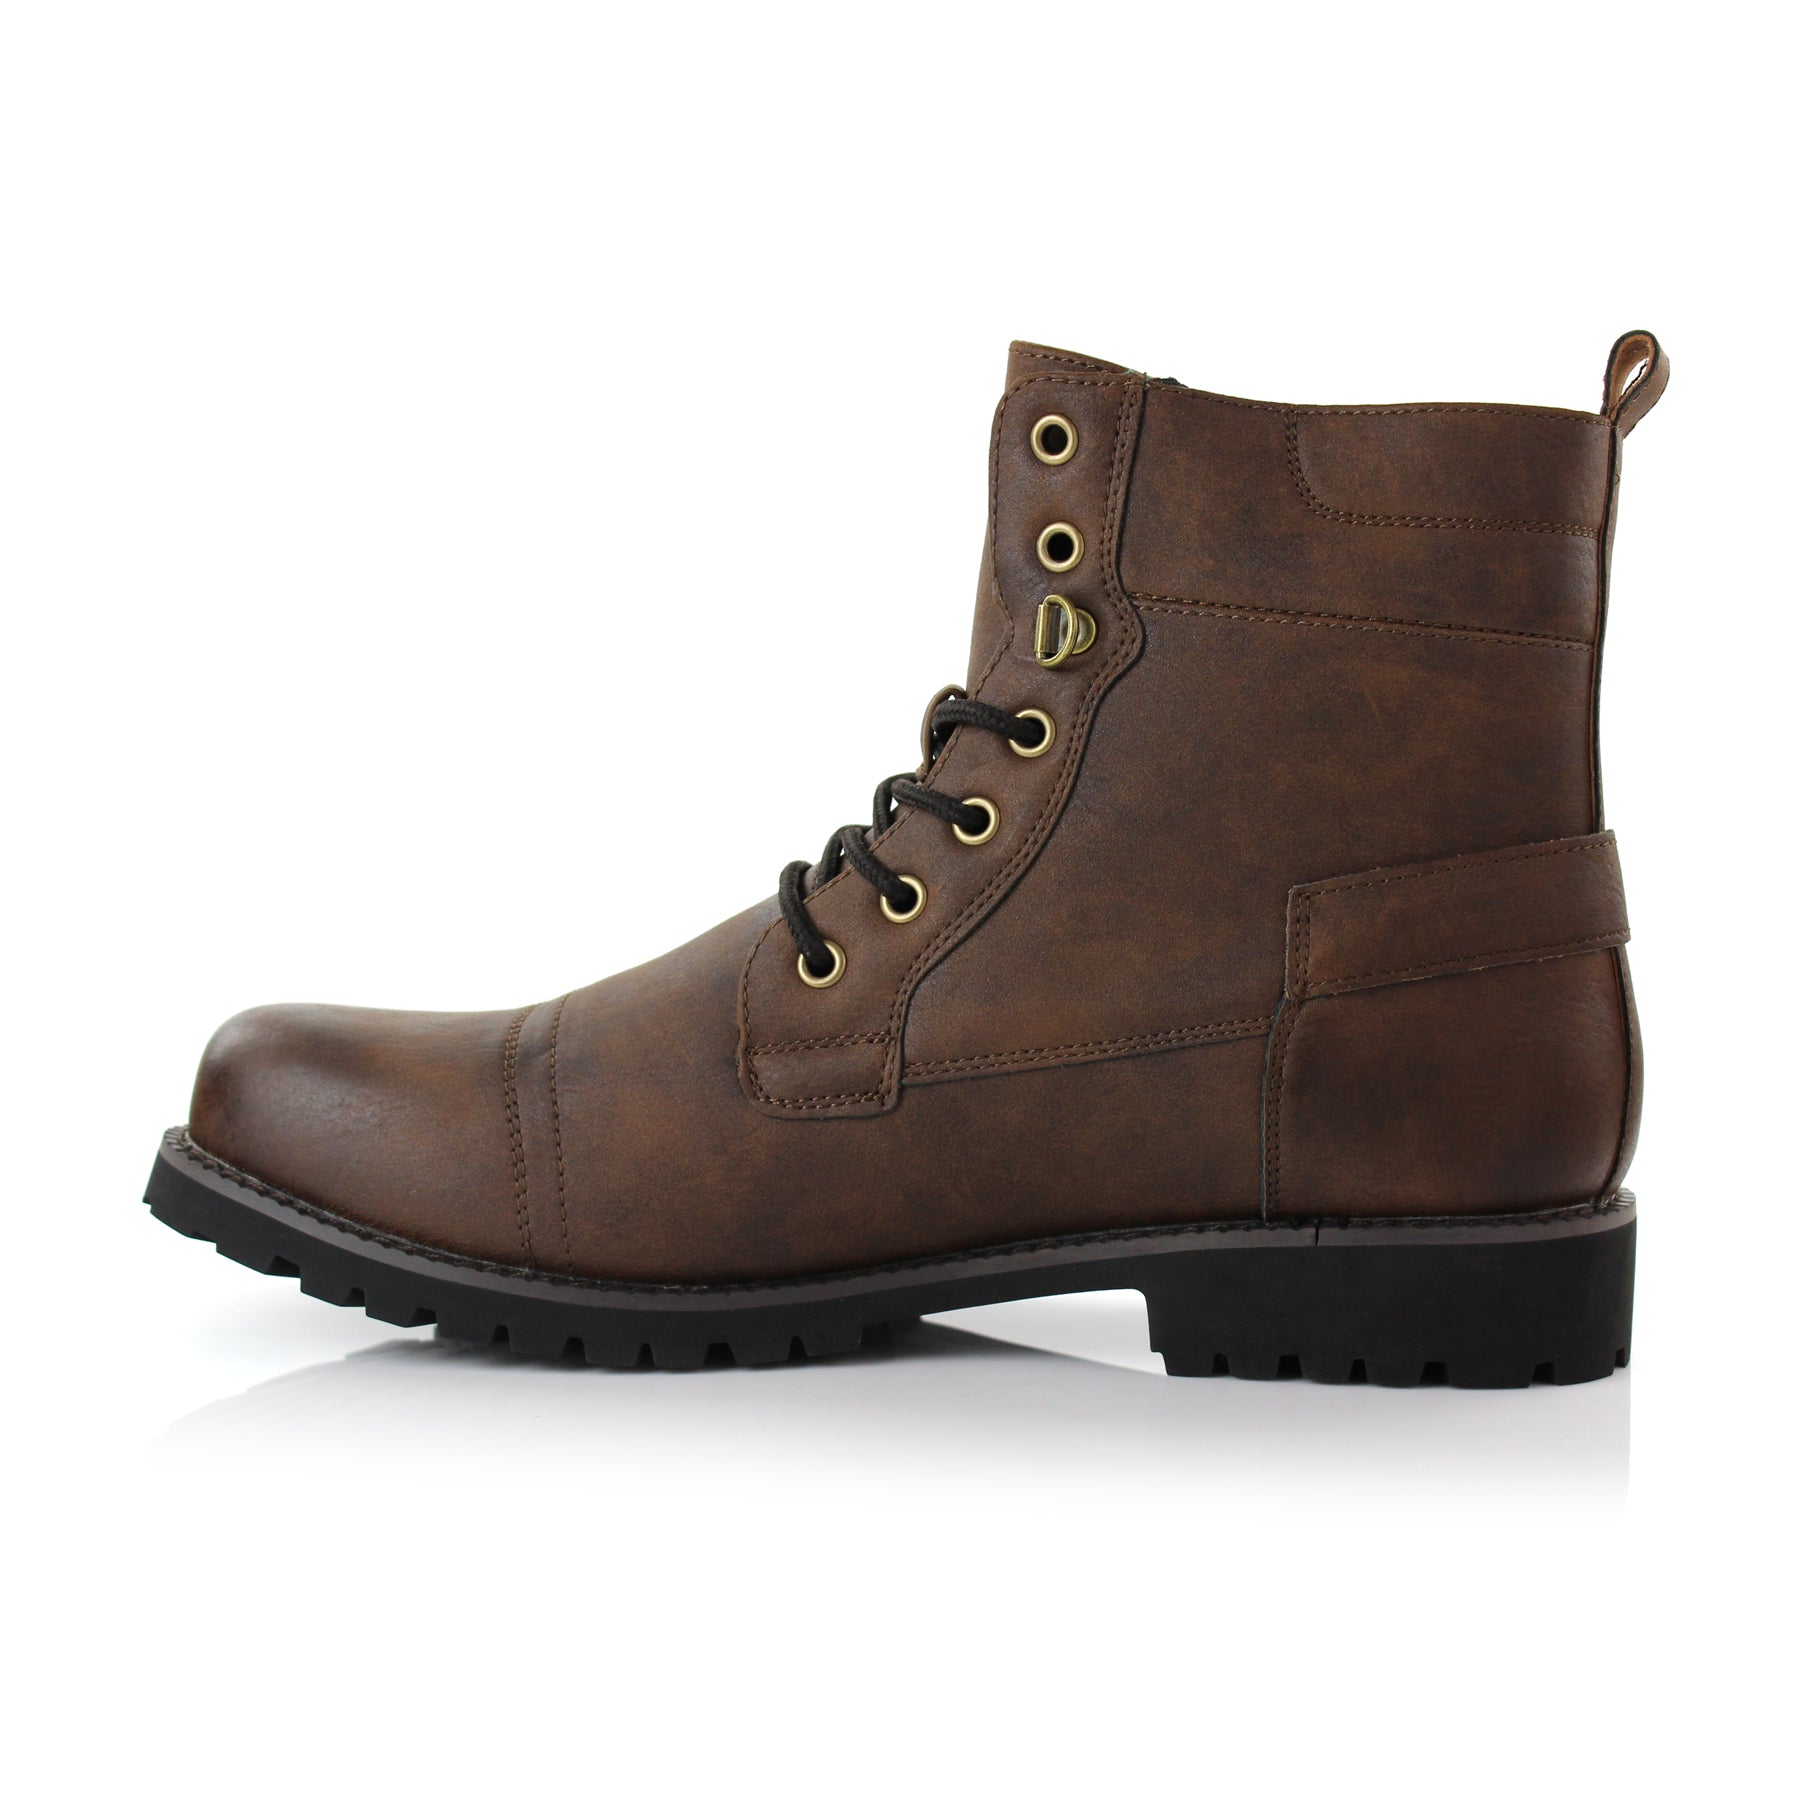 Rugged Inner Fur Boots | Fabian by Polar Fox | Conal Footwear | Inner Side Angle View